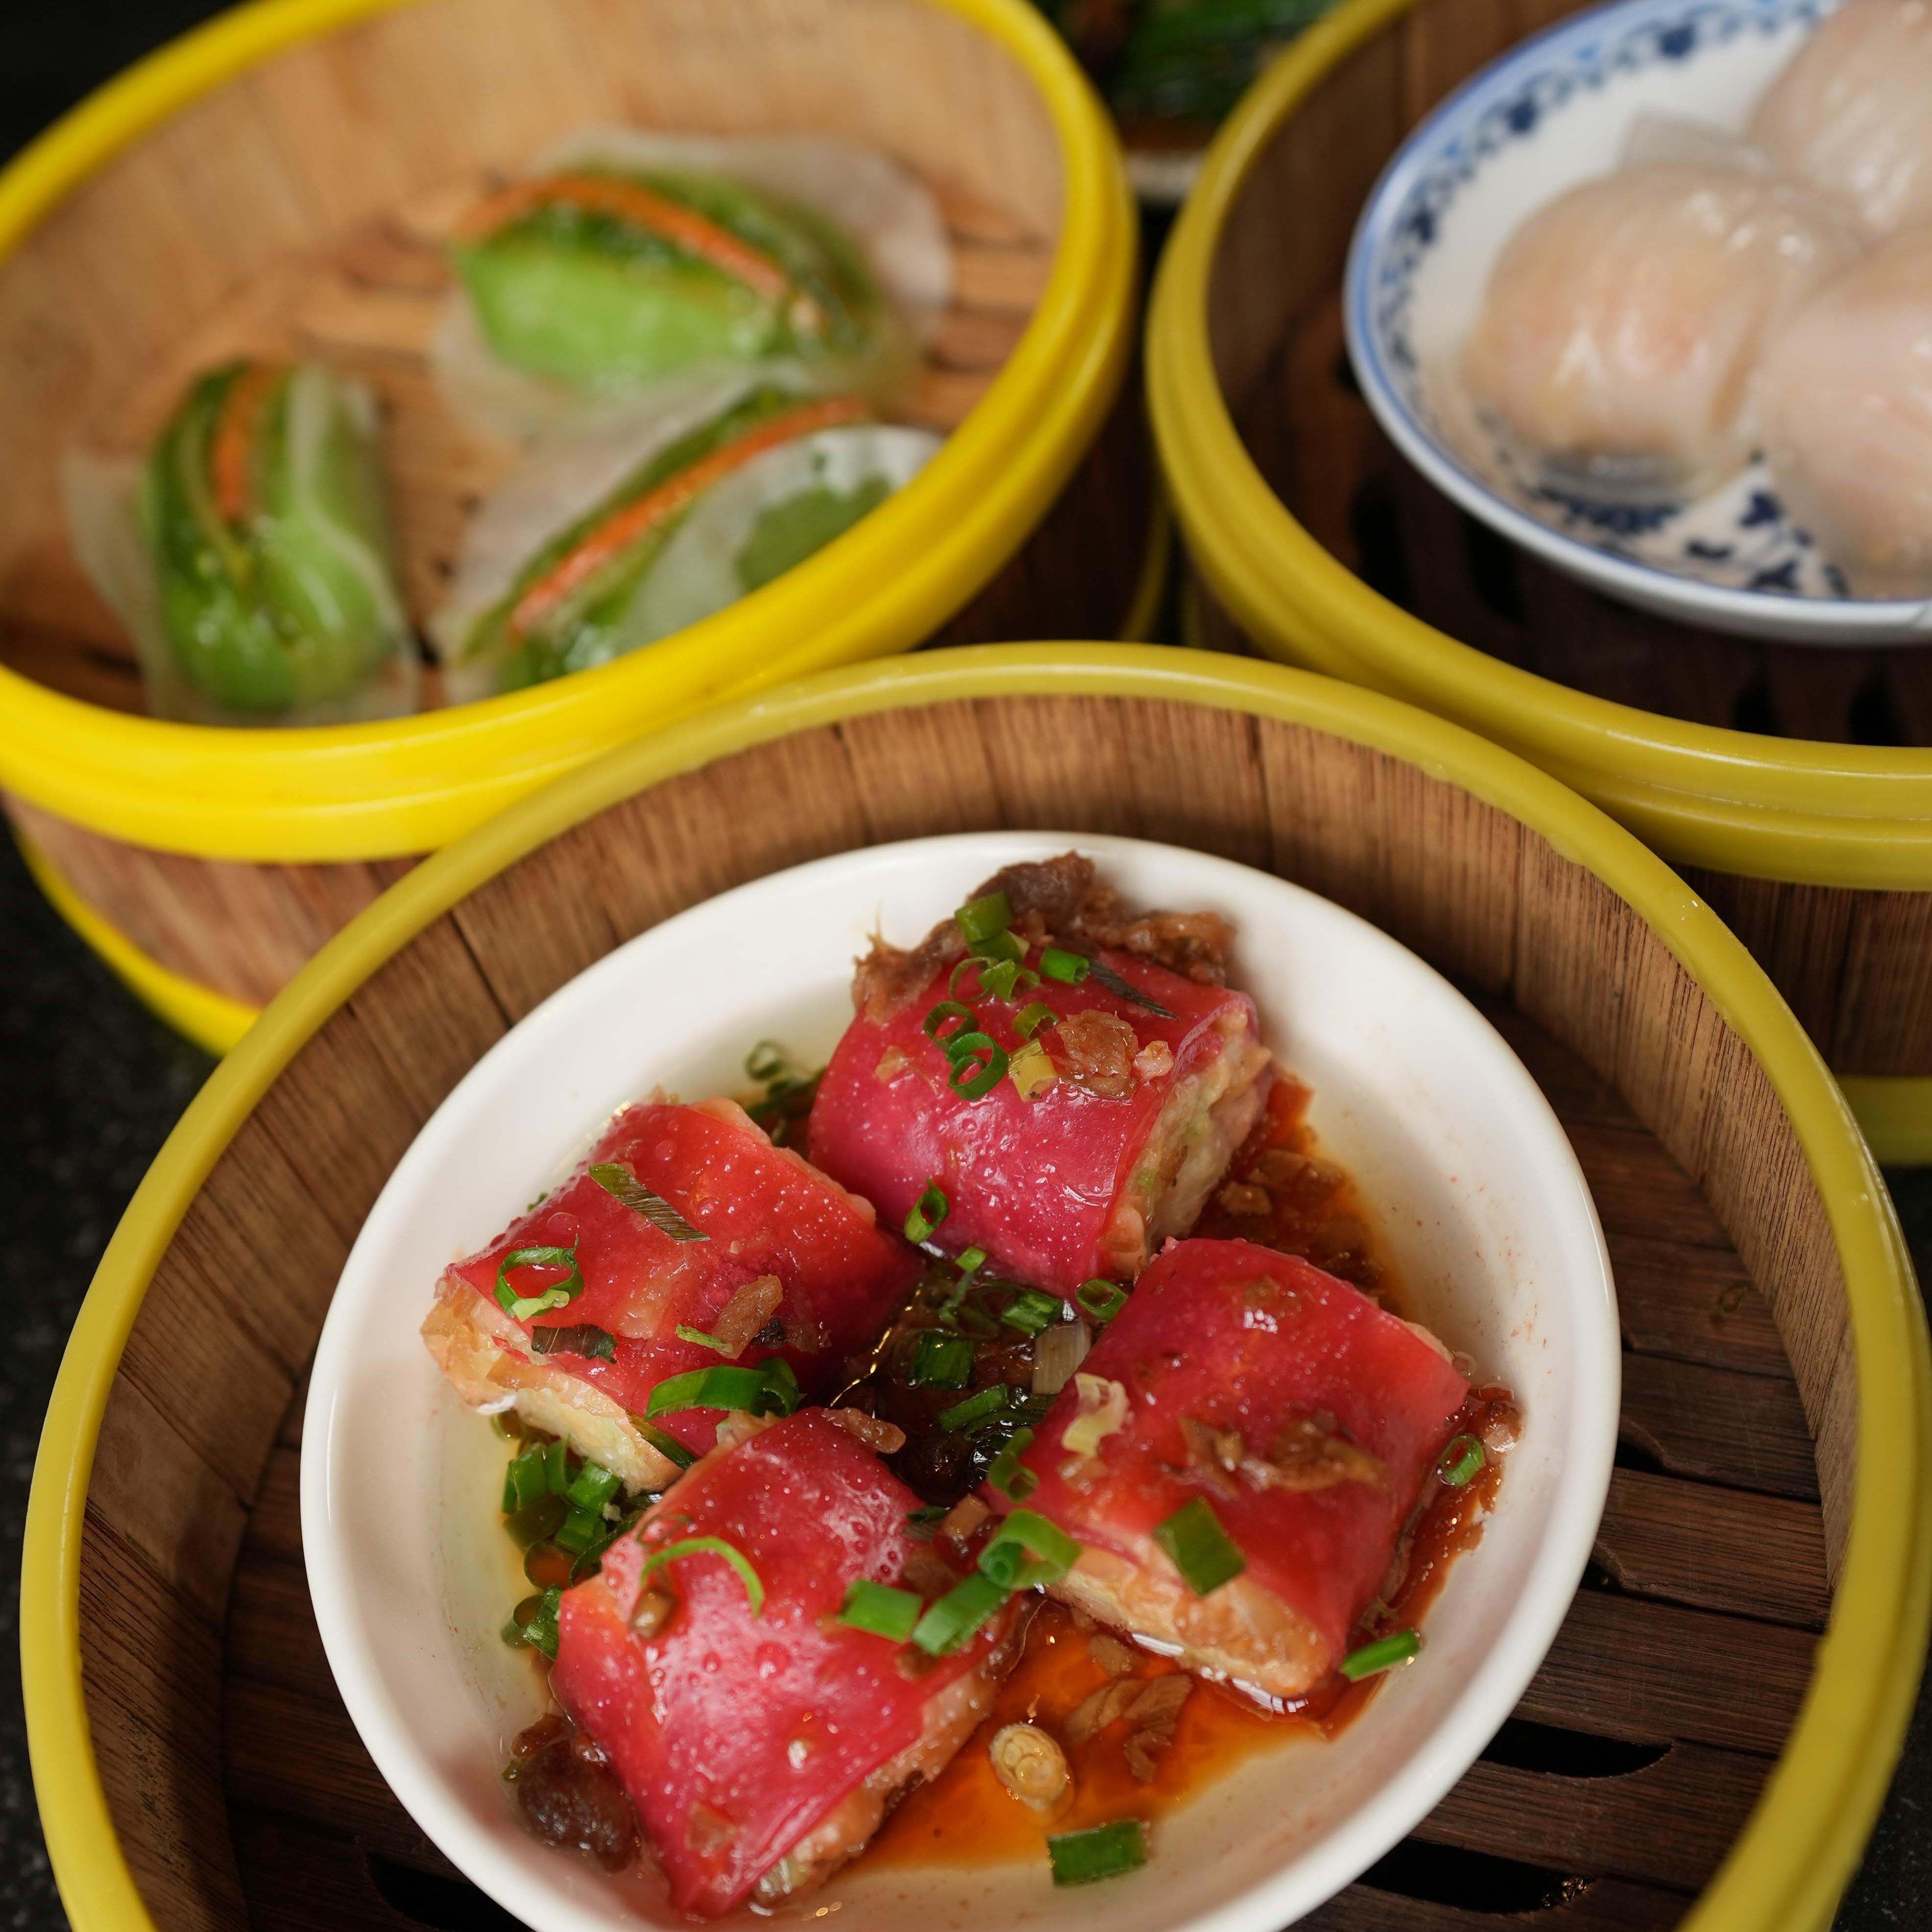 Eat dim sum like a local in Guangdong province